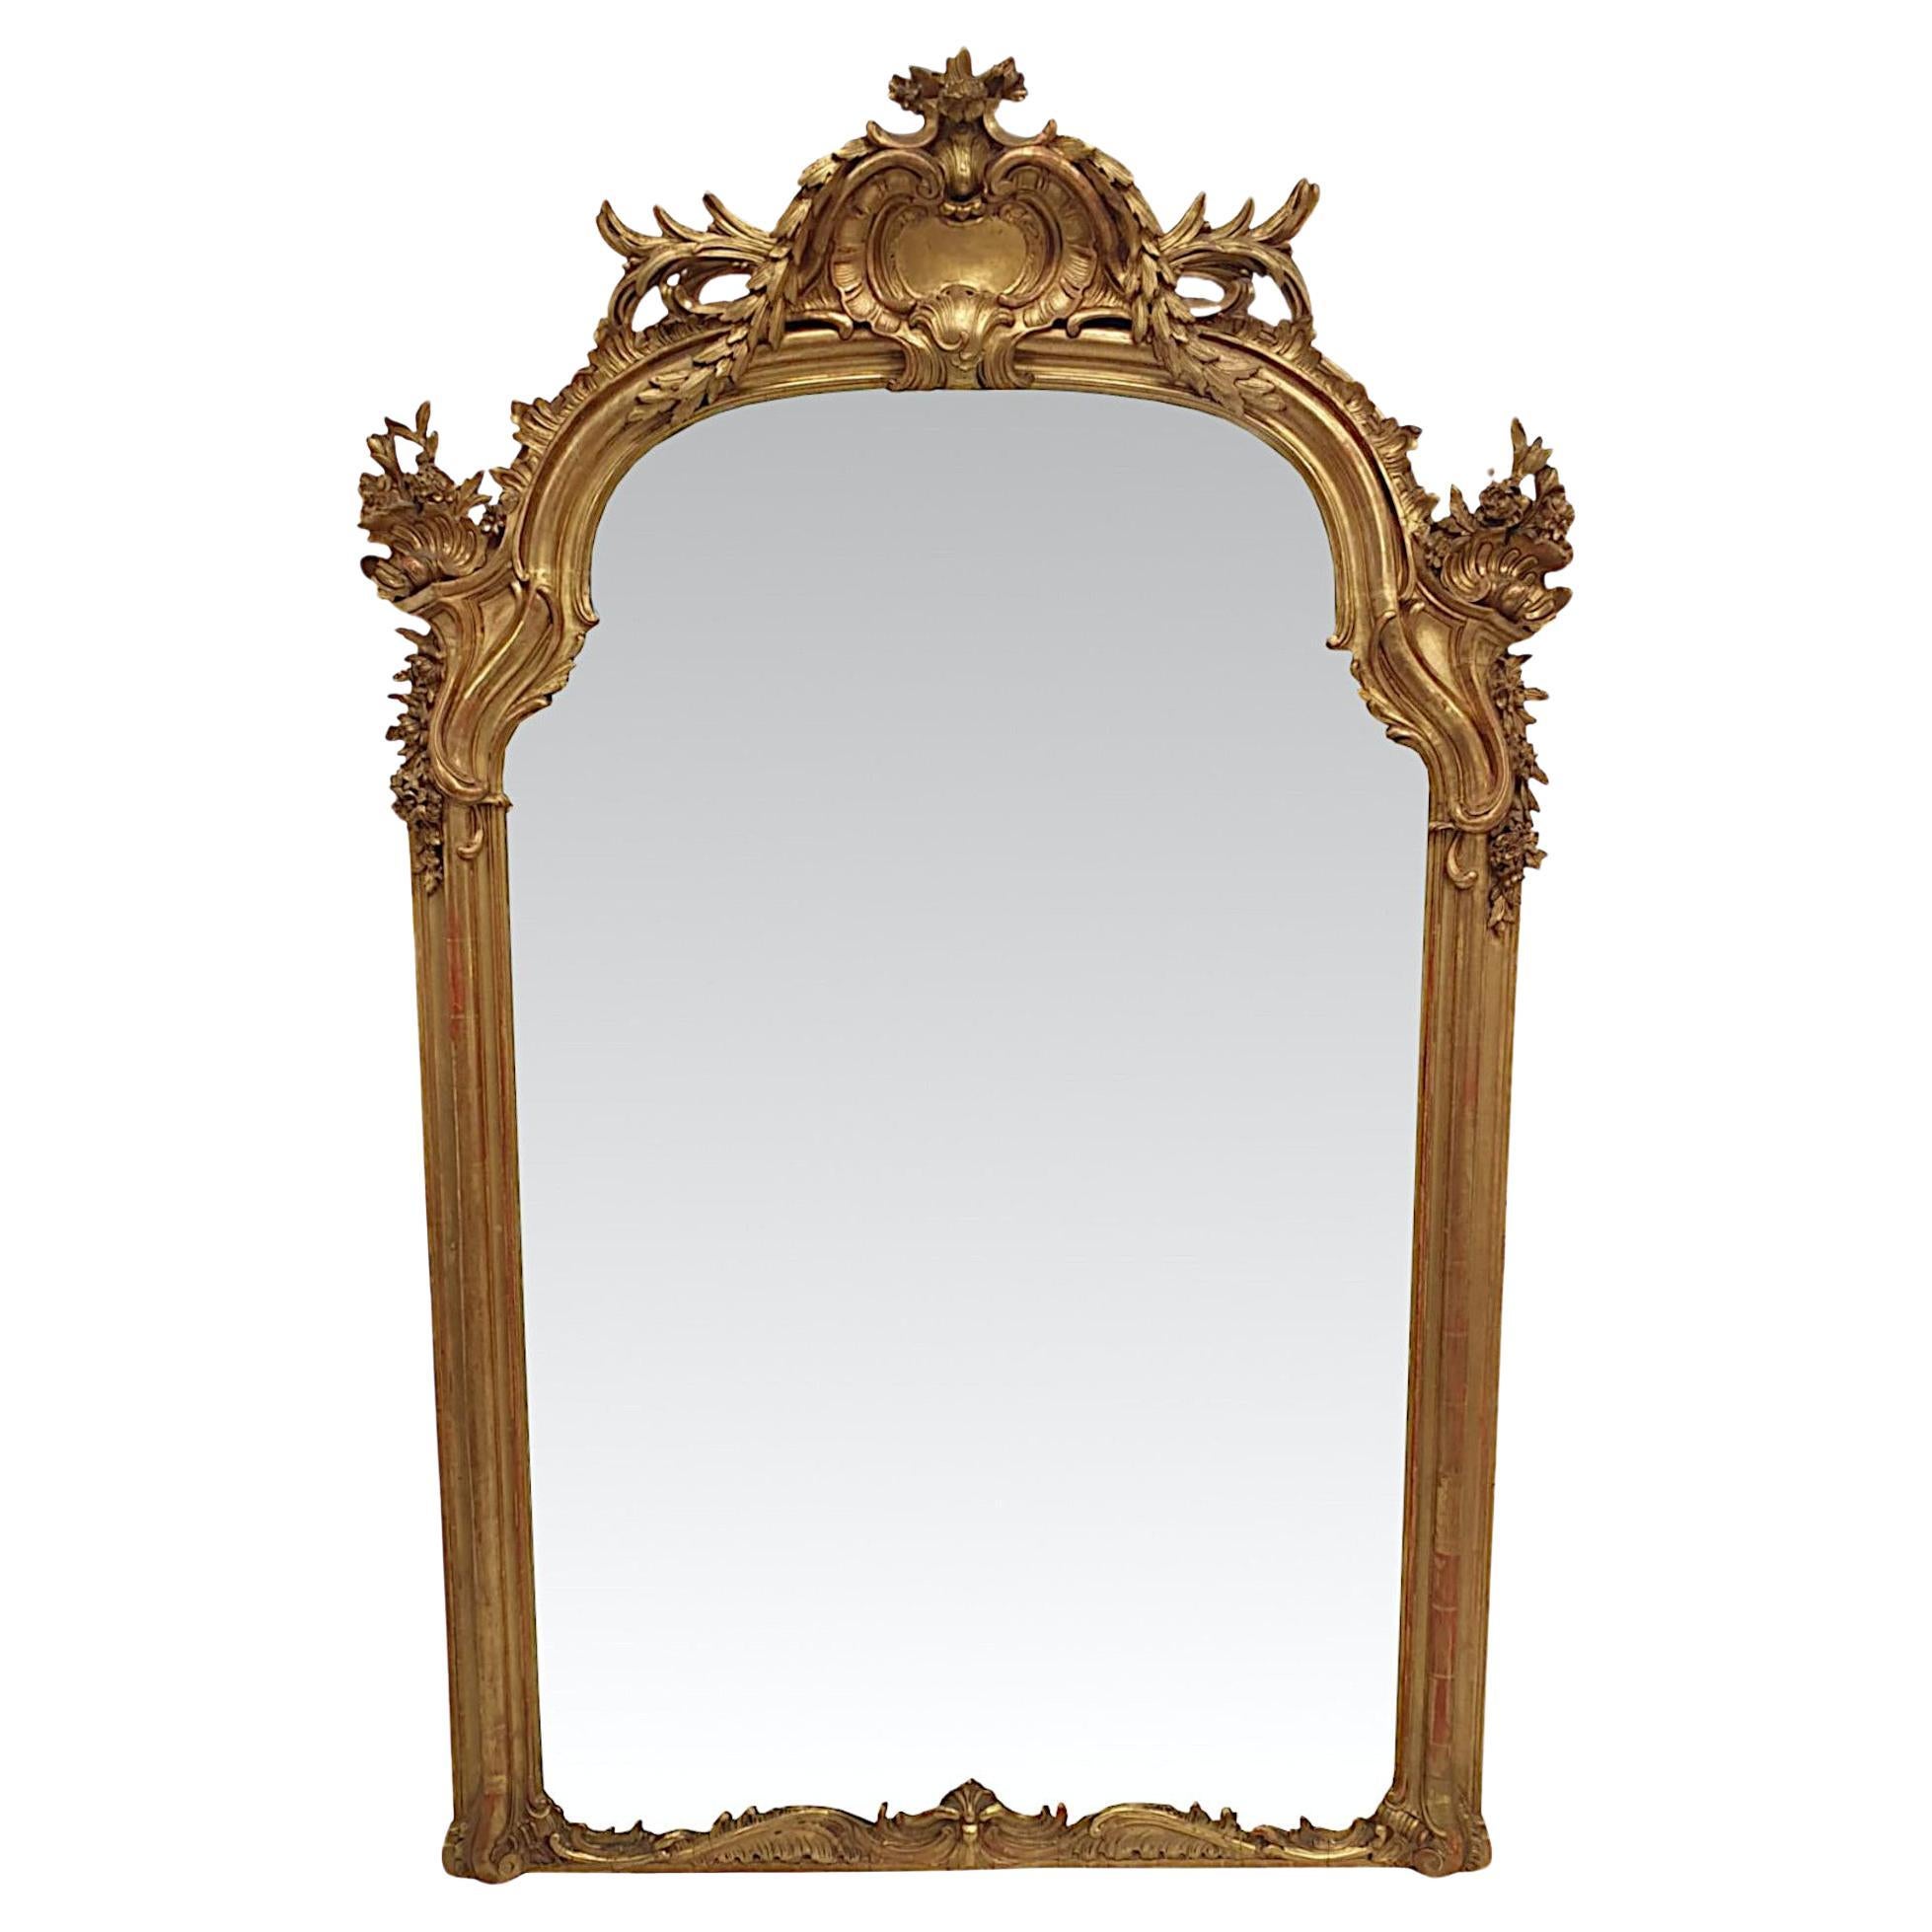 A Fabulous 19th Century Large Giltwood Hall or Overmantel Mirror For Sale